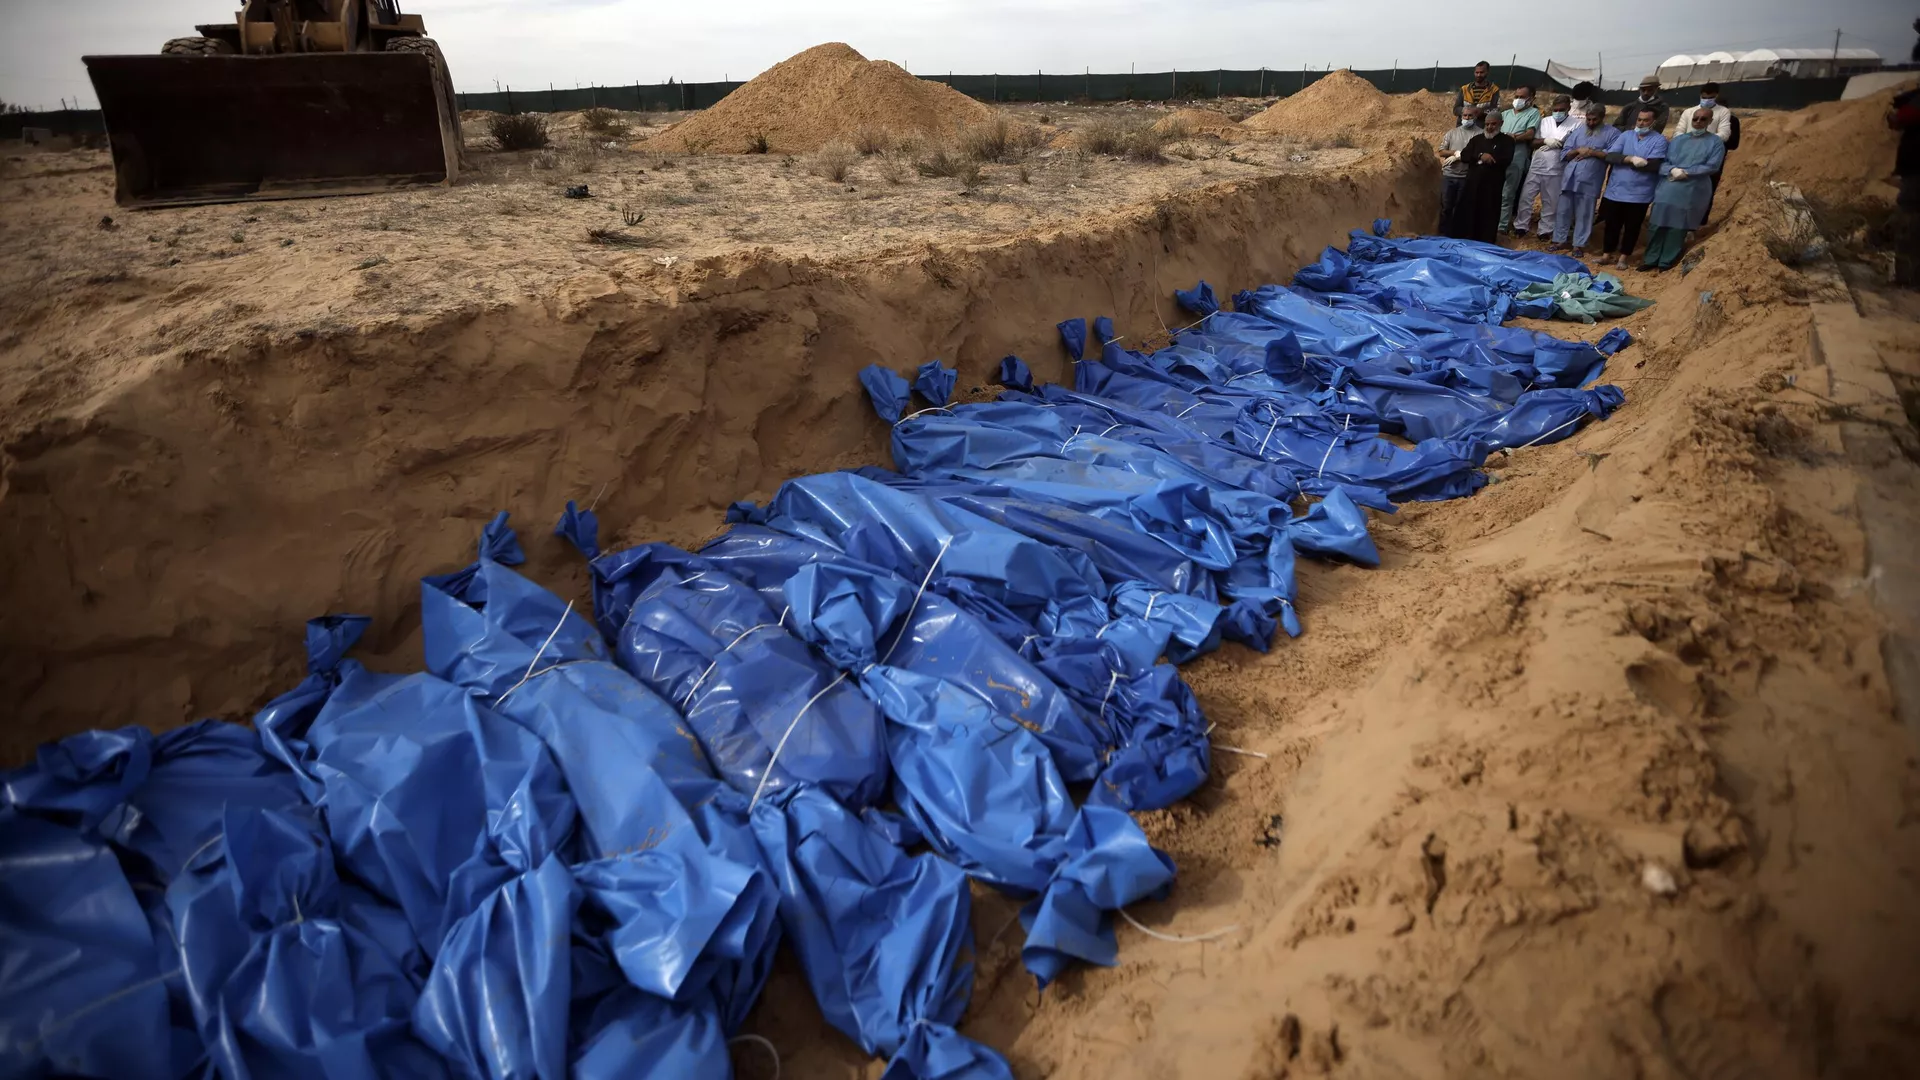 Israel Rejects Calls for Independent Investigation Into Mass Graves